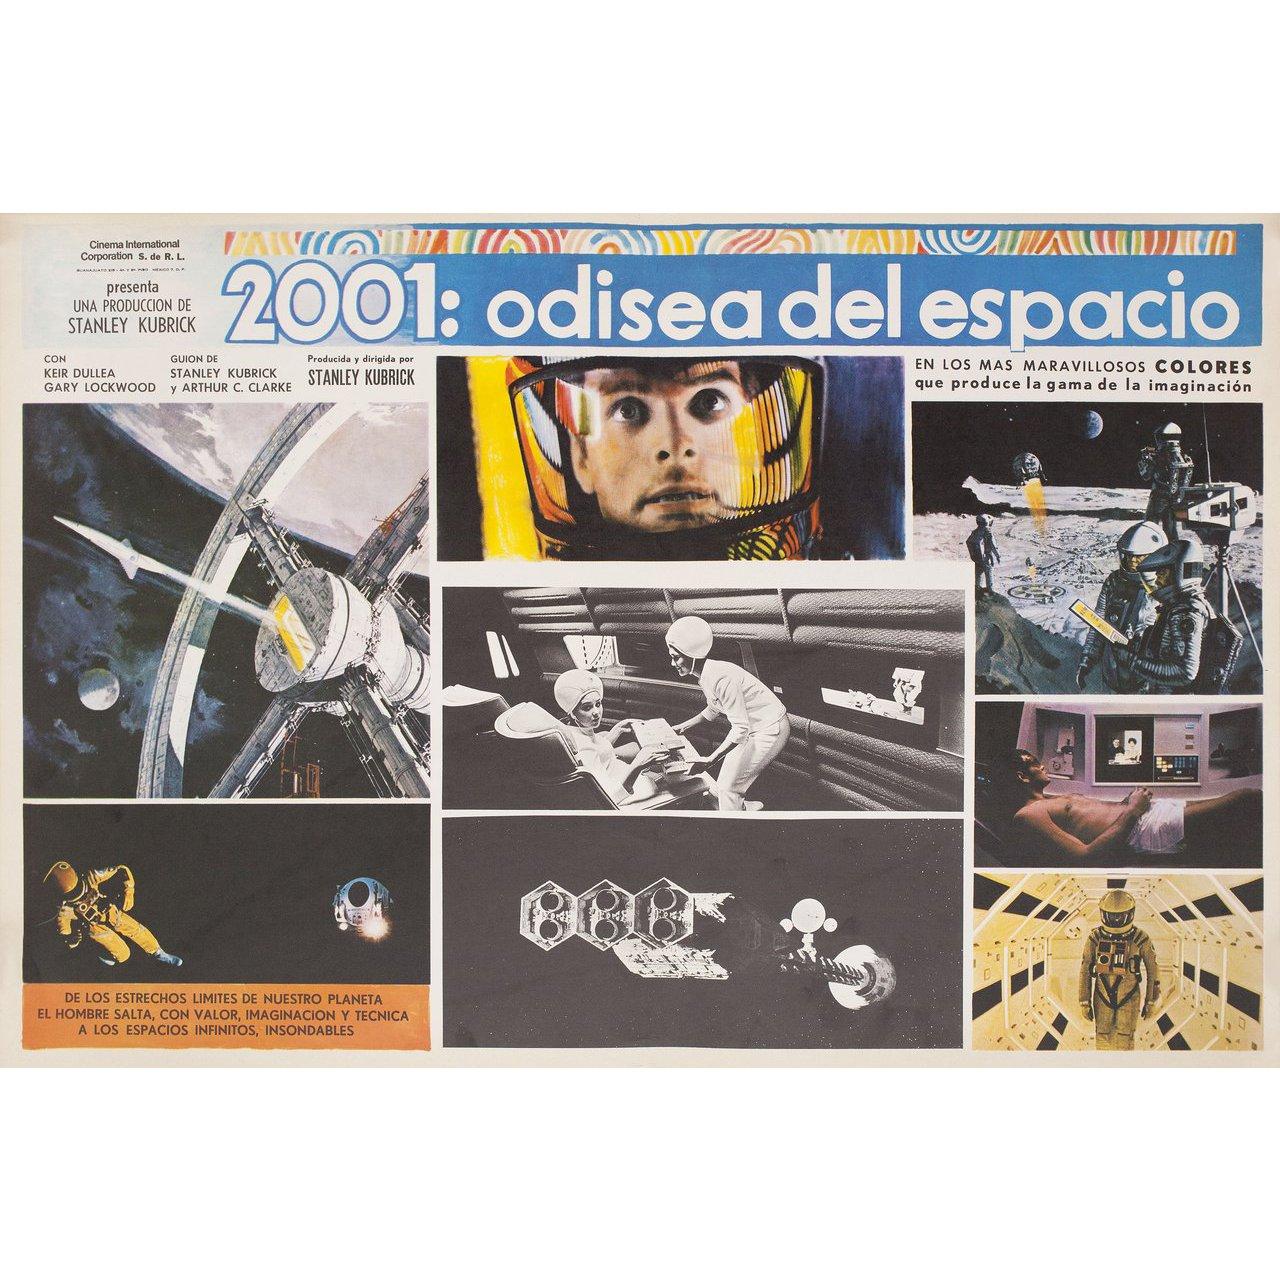 Original 1970s re-release Mexican scene card for the film 2001: A Space Odyssey directed by Stanley Kubrick with Keir Dullea / Gary Lockwood / William Sylvester / Daniel Richter. Fine condition, folded. Many original posters were issued folded or